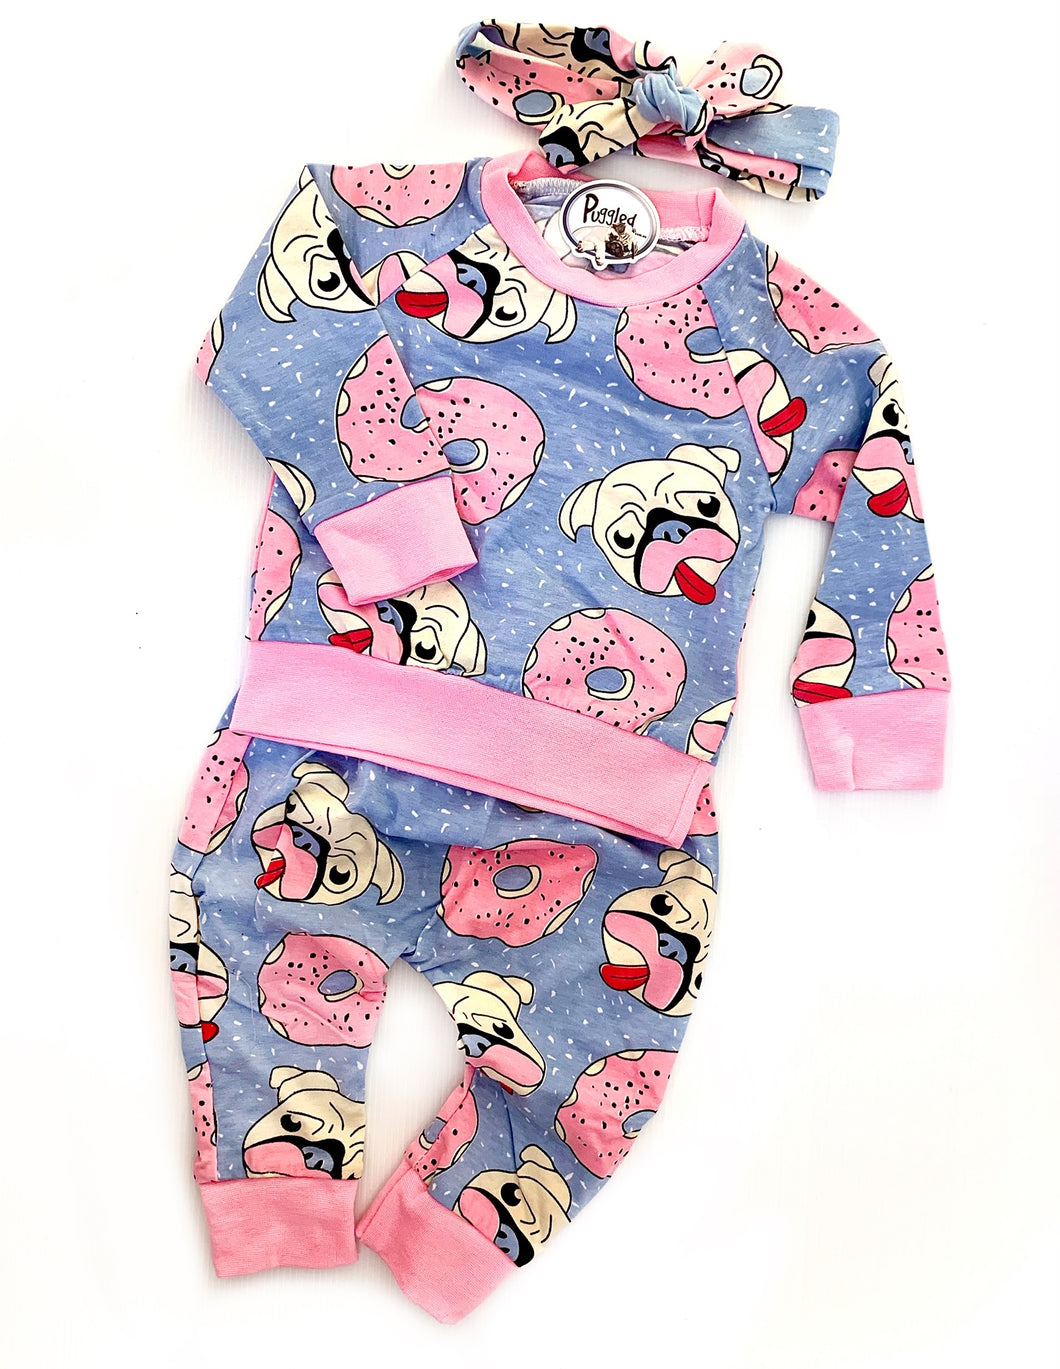 Donuts & Pugs 3 piece Baby Outfit